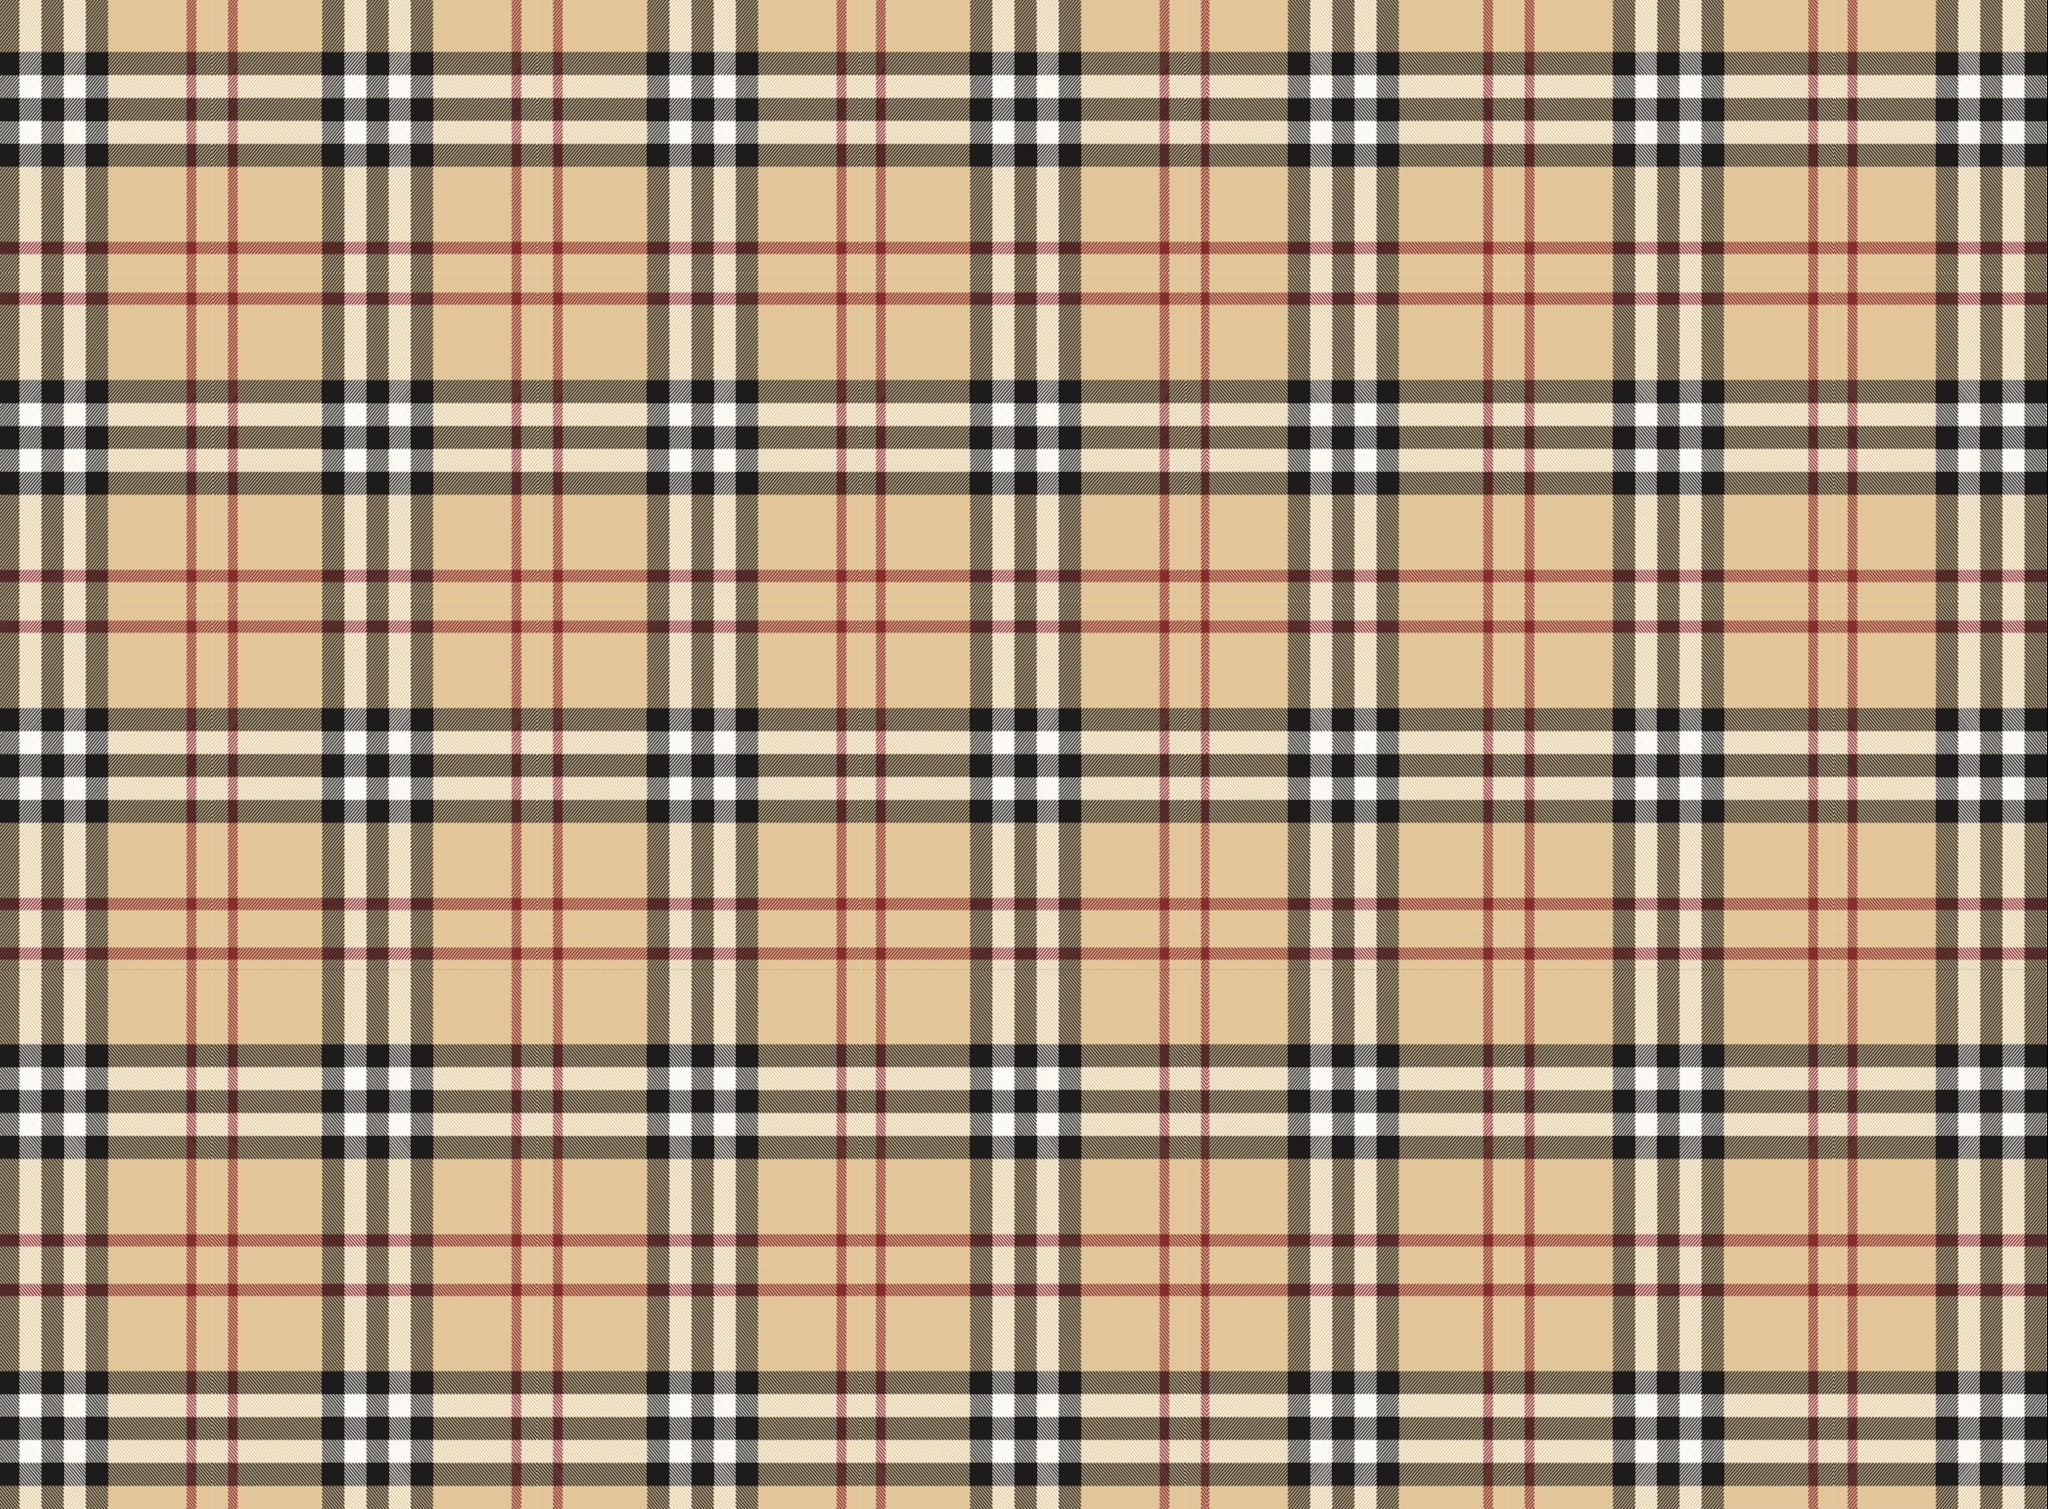 Burberry, Burberry textile, Aero, Patterns, backgrounds, full frame